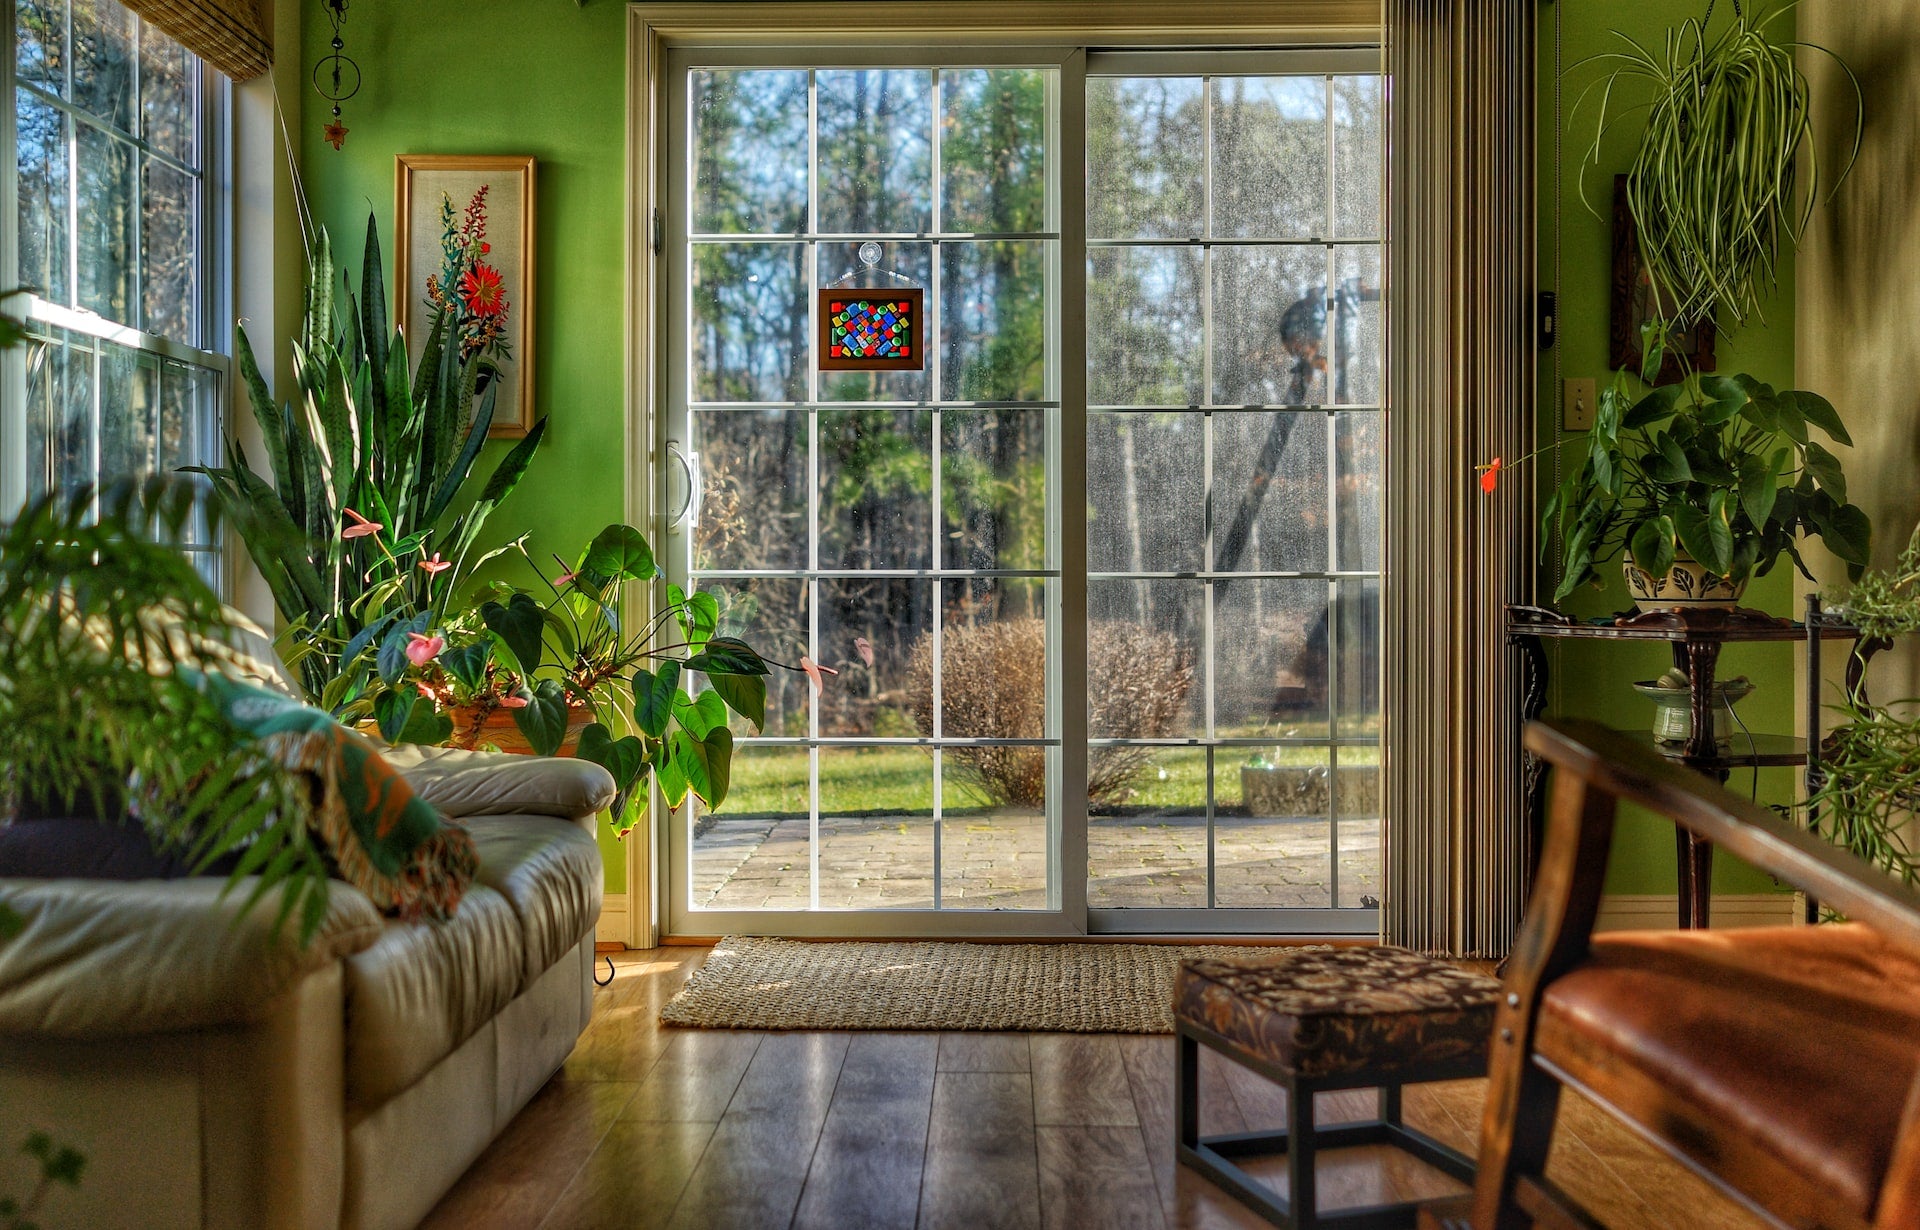 Caption: If you want to bring more natural elements into your home, open those heavy curtains and let the sunshine in! A large window in a living room filled with house plants and other natural elements.  Photo by Edan Cohen on Unsplash